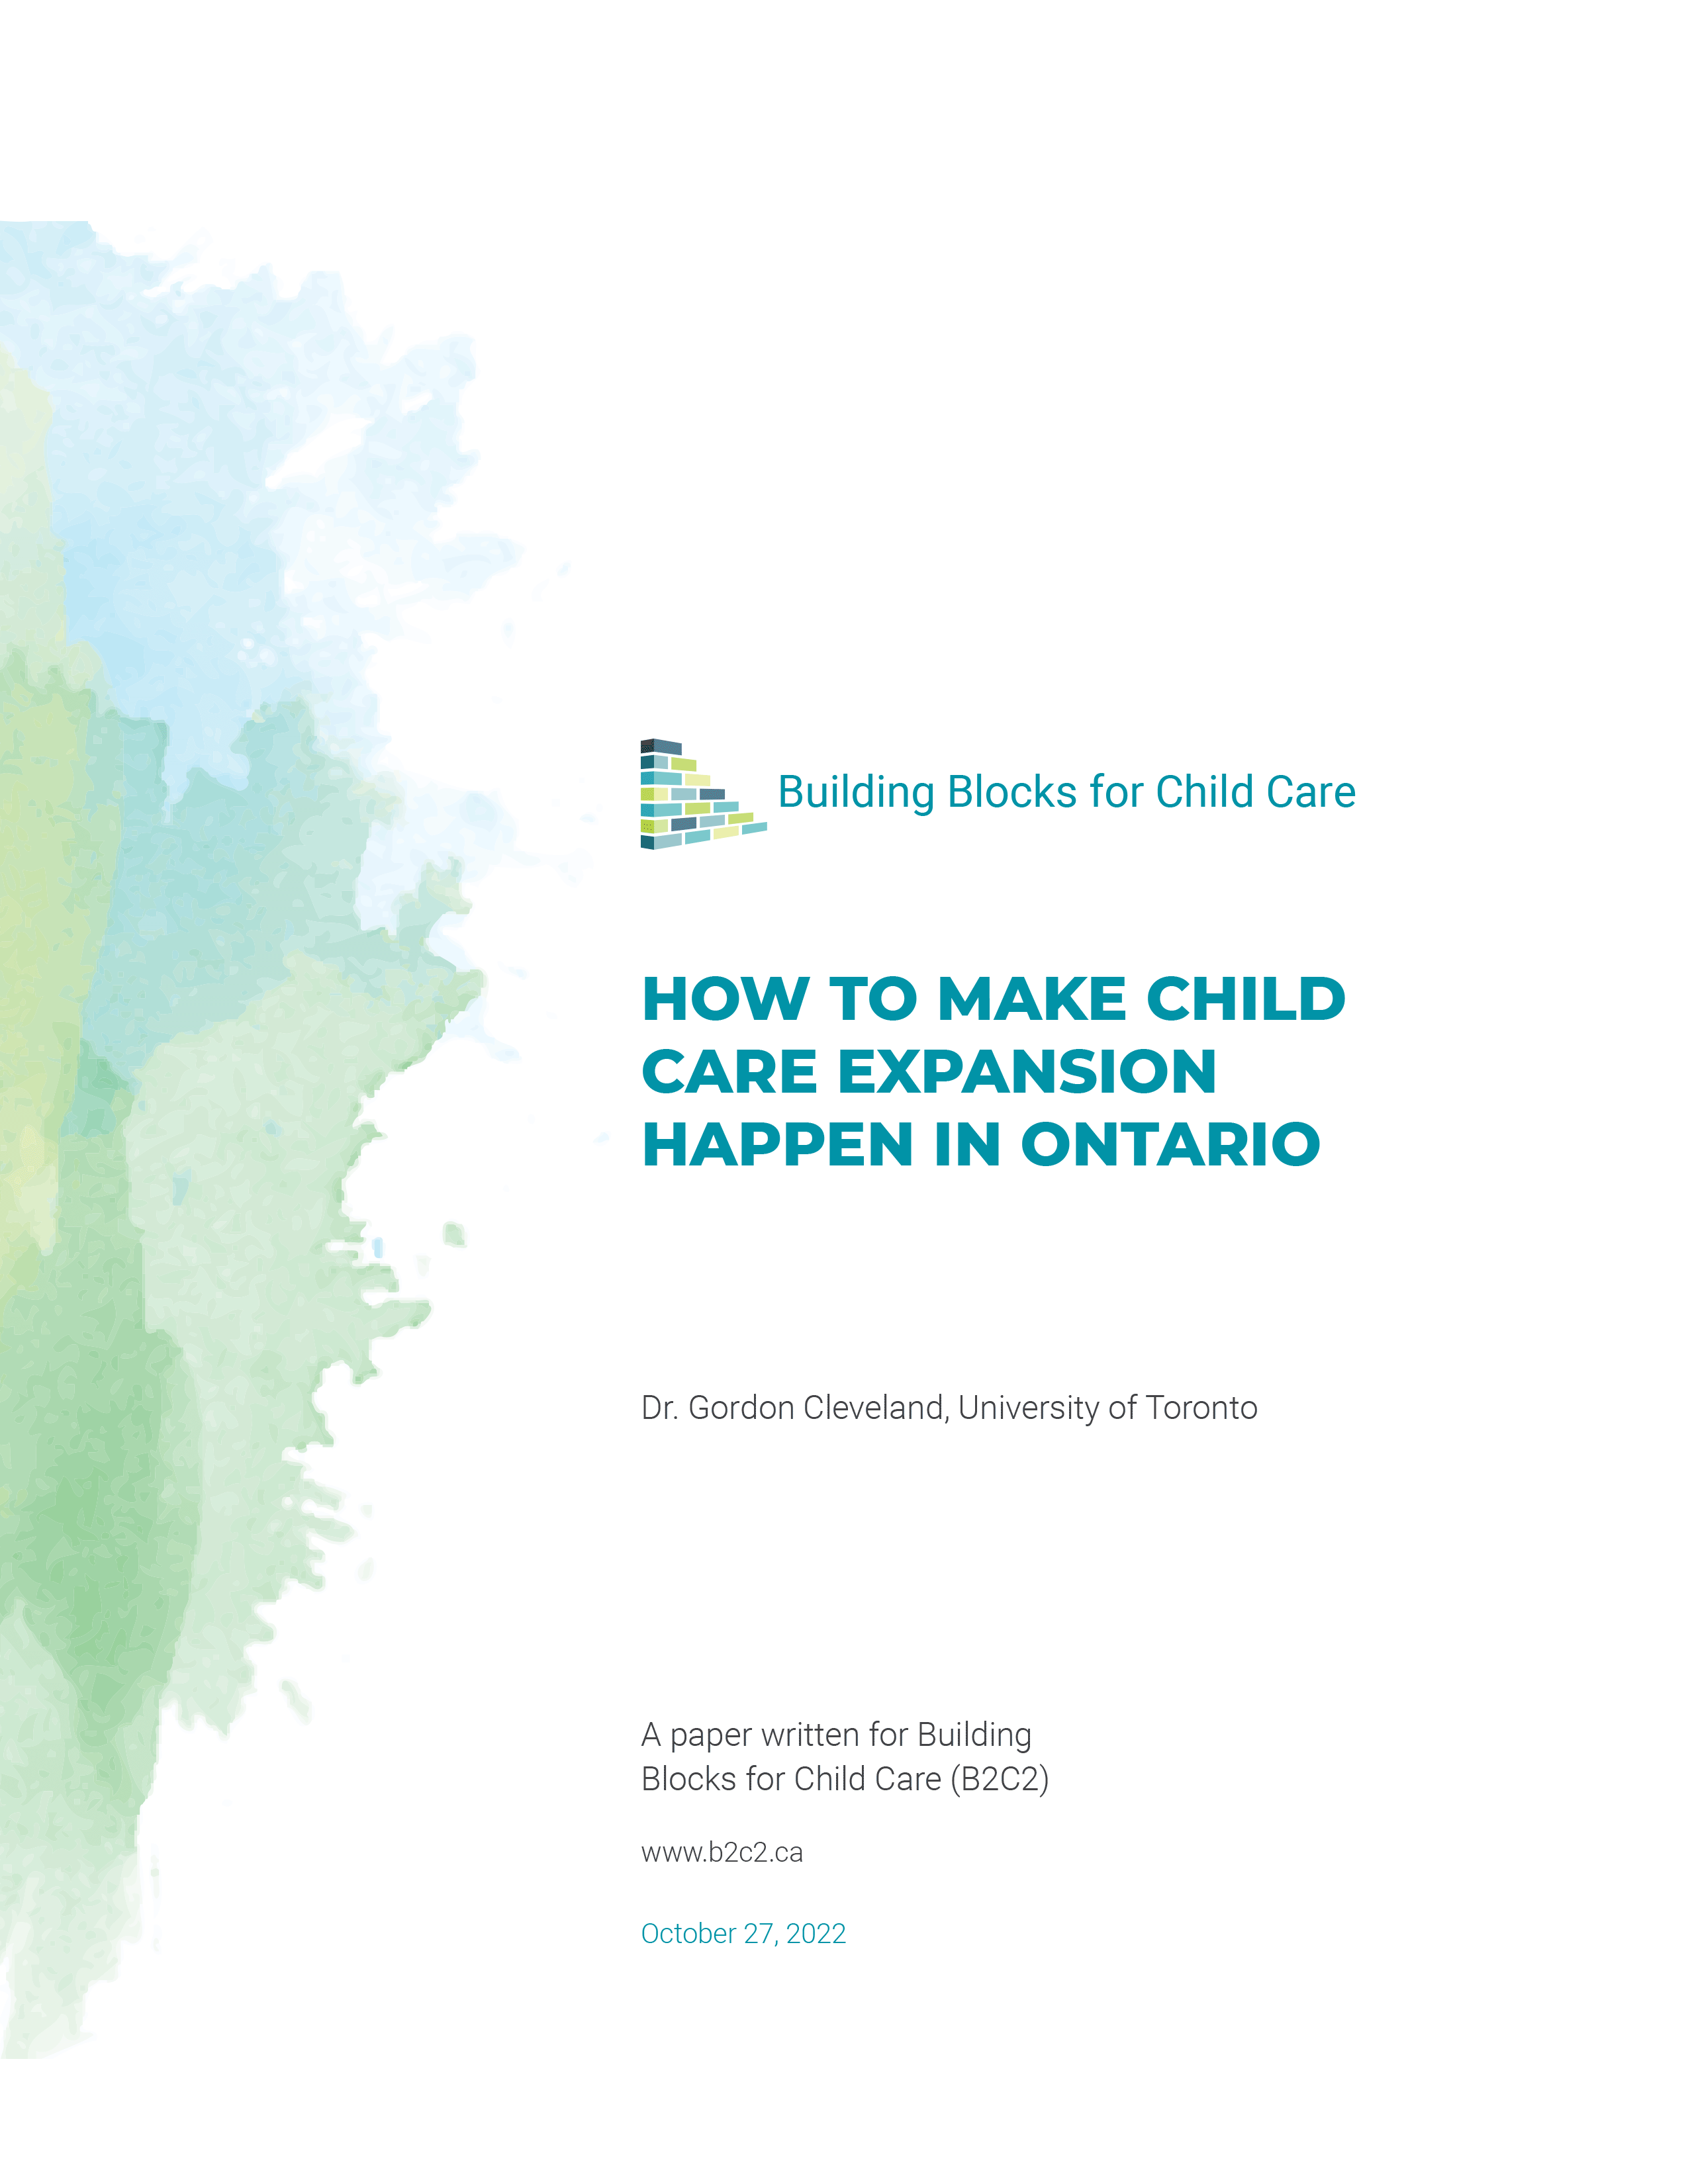 Cover of paper: How to Make Child Care Expansion Happen in Ontario. Building Blocks for Child Care. By Dr. Gordon Cleveland, University of Toronto. A paper written for Building Blocks for Child Care. www.b2c2.ca. October 27, 2022.